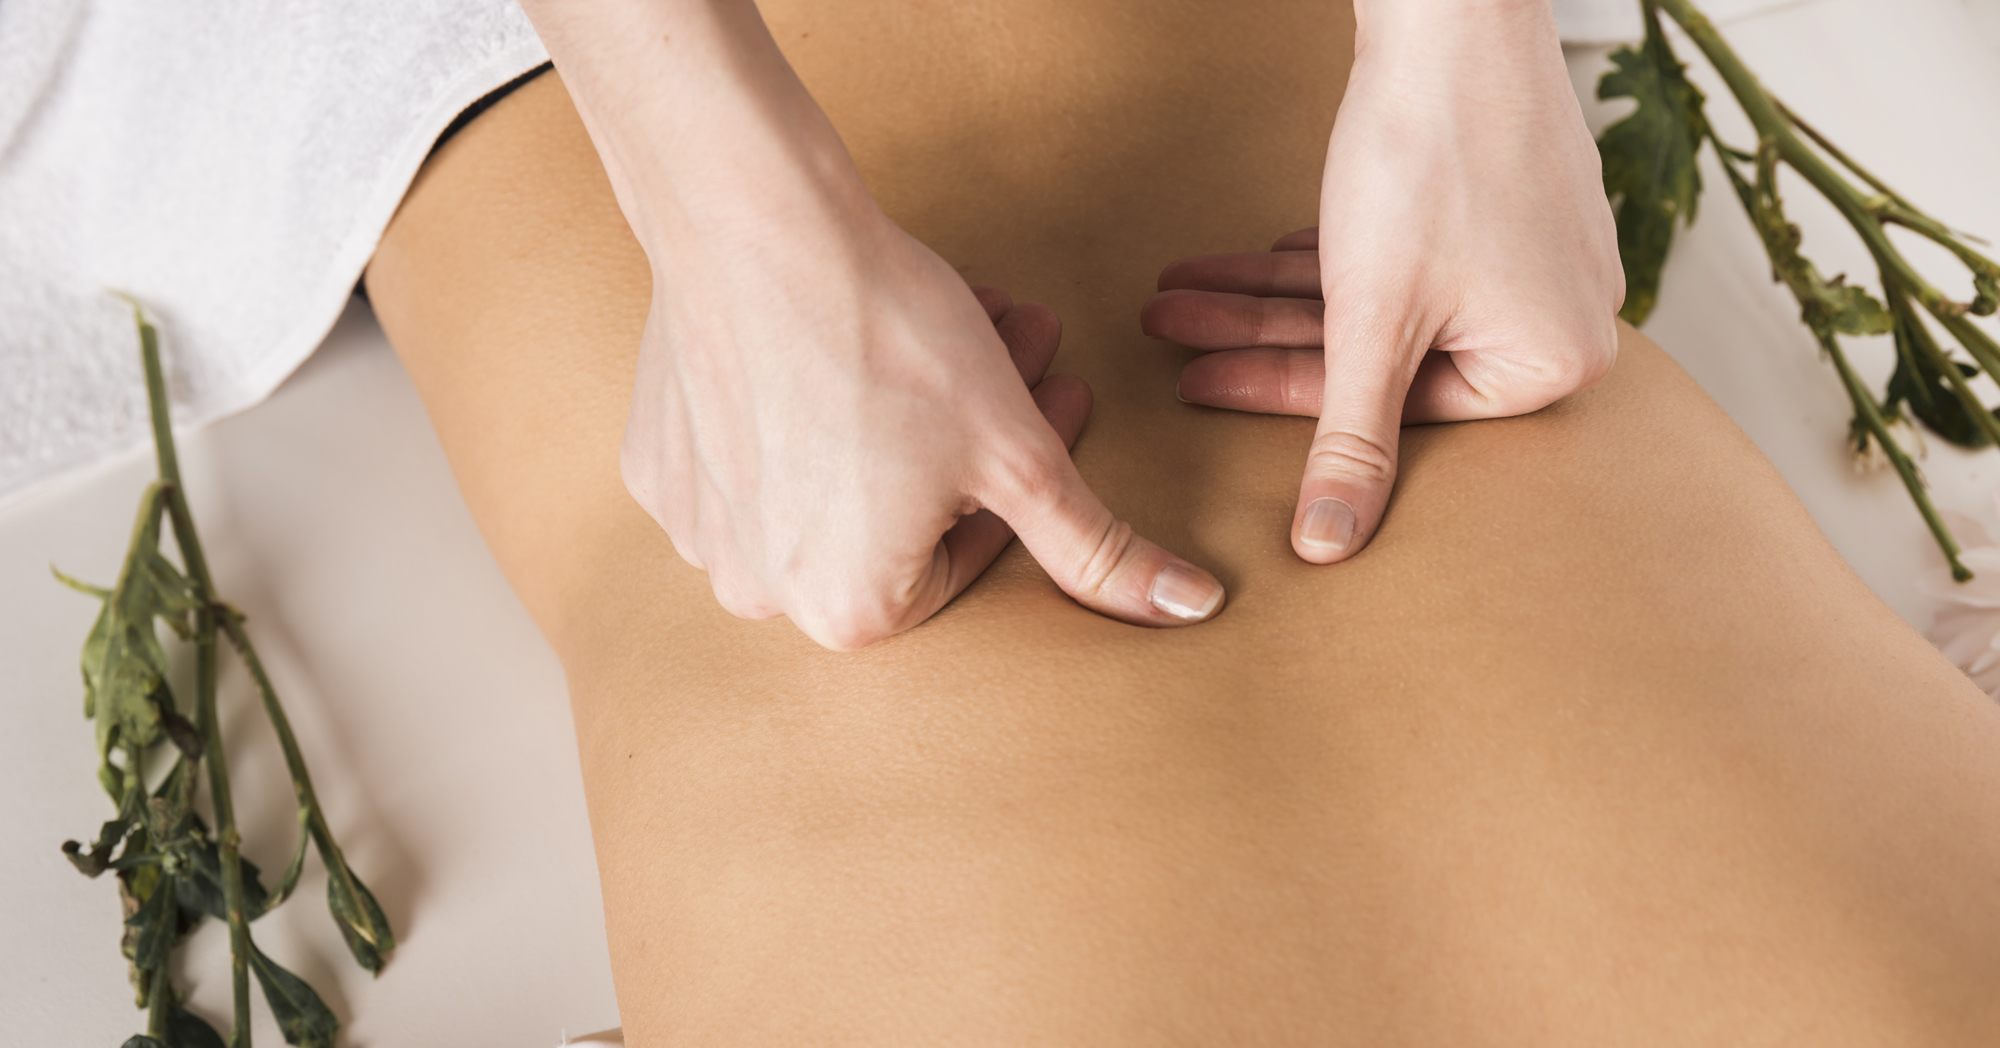 Types Of Massage Therapy For Lower Back Pain